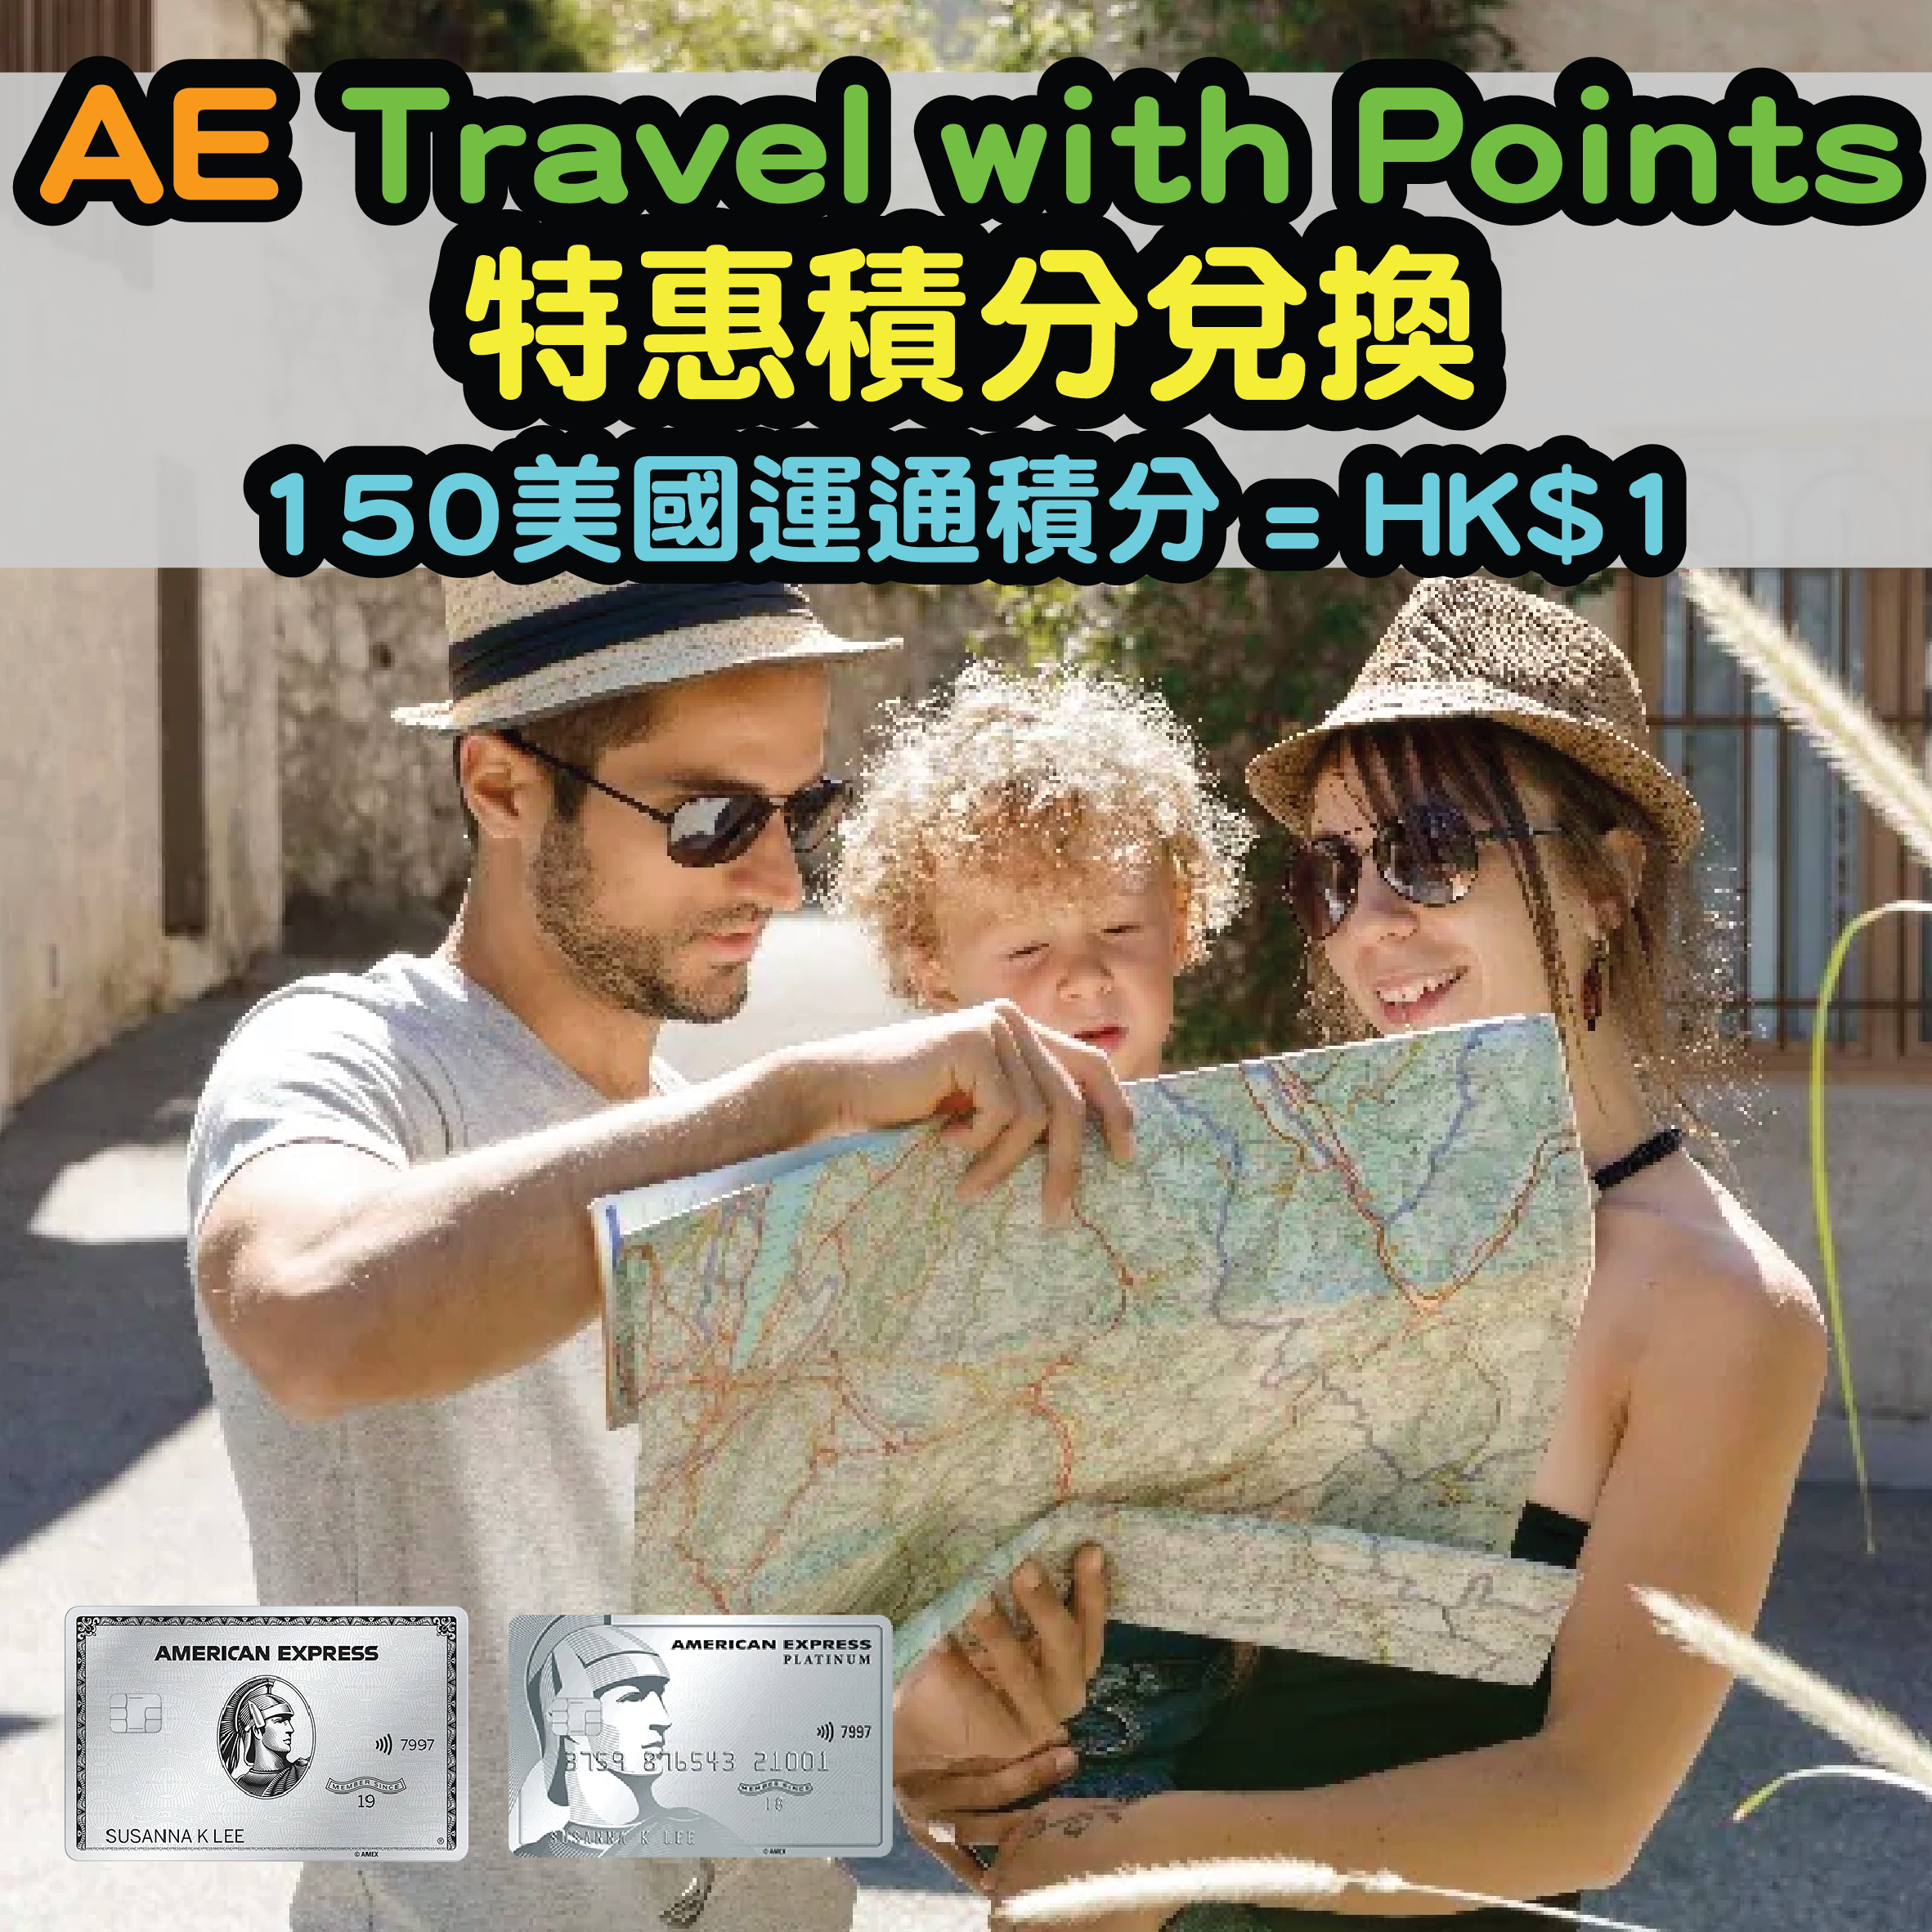 American Express Travel Online